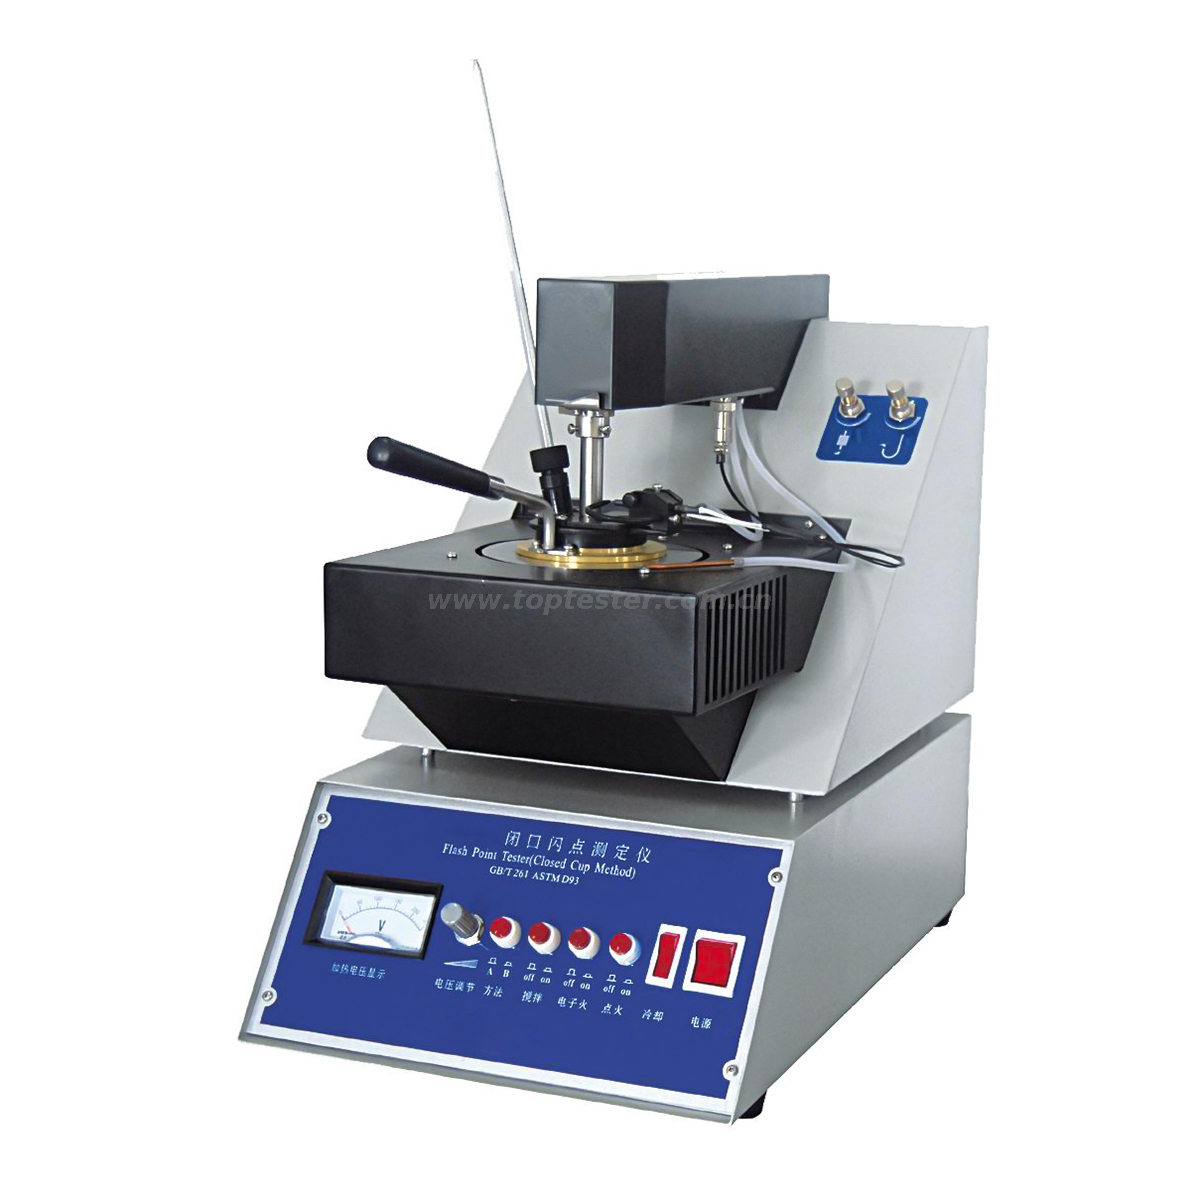 ASTM D93 Closed Cup Flash Point Tester Model TPC-006